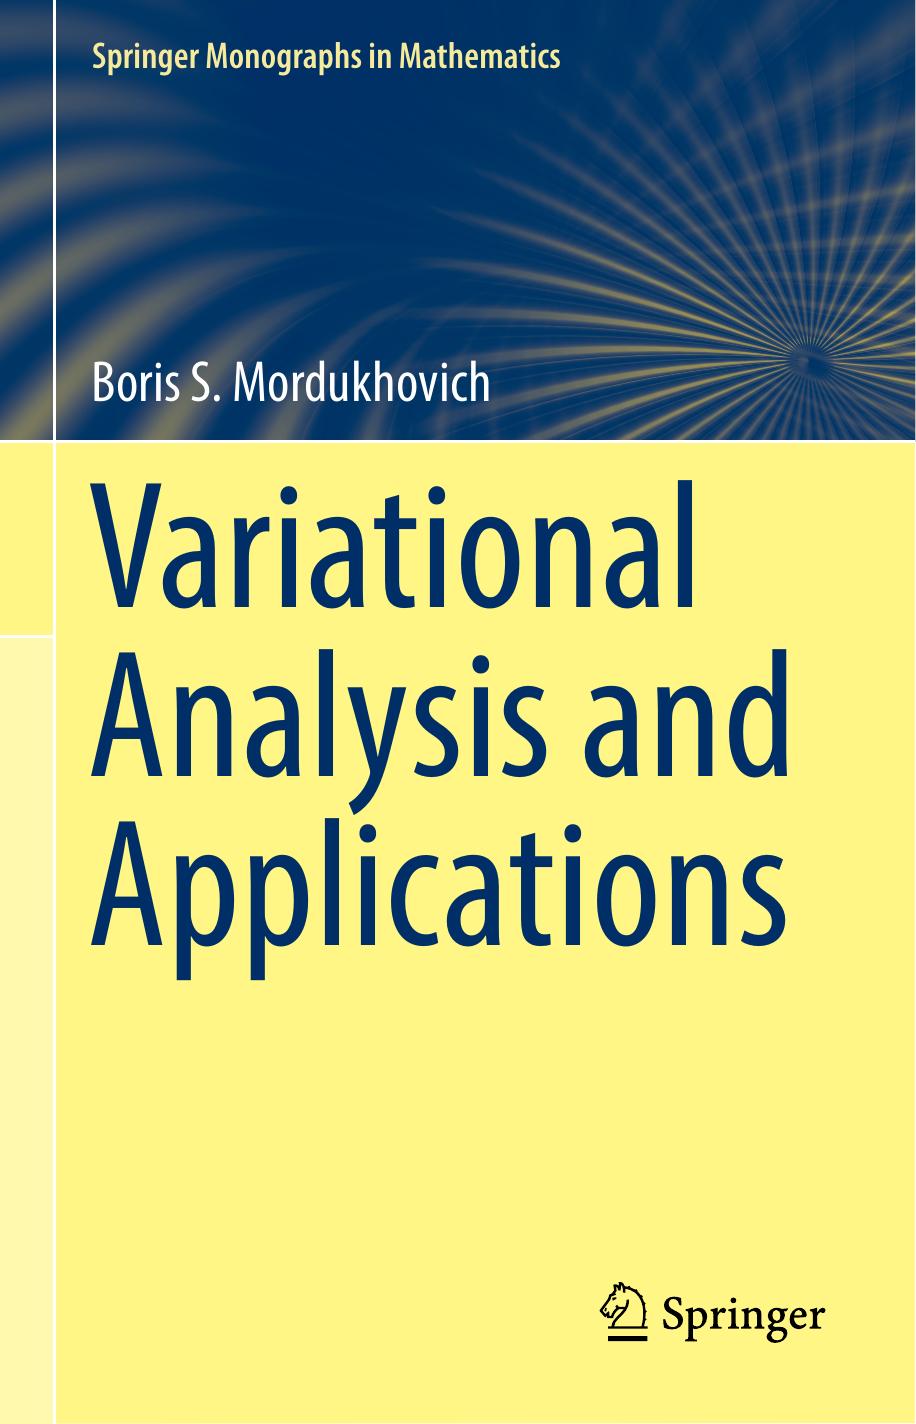 Variational Analysis and Applications by Boris S. Mordukhovich